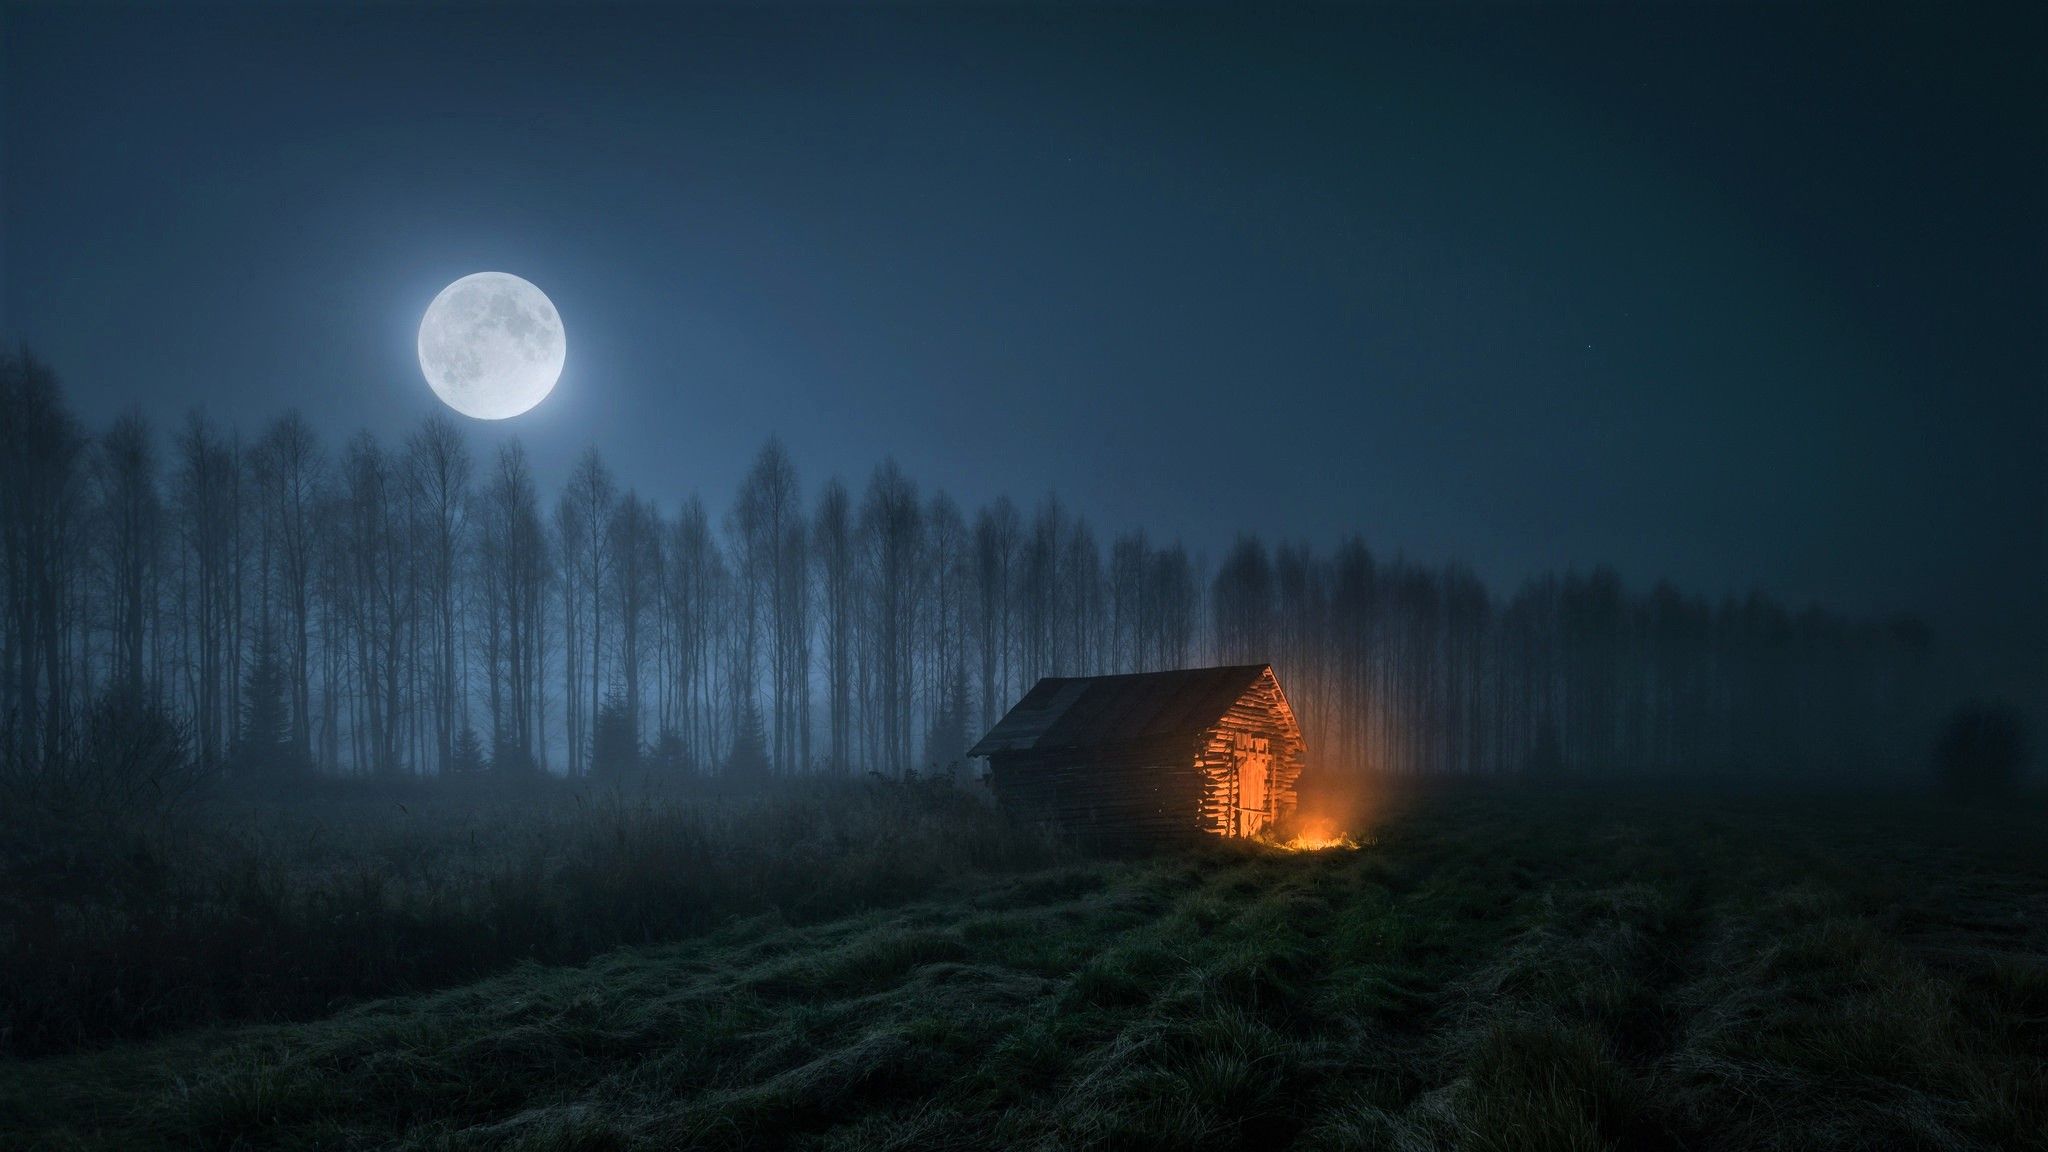 Full Moon over Lone Cabin in Field HD Wallpaper. Background Image